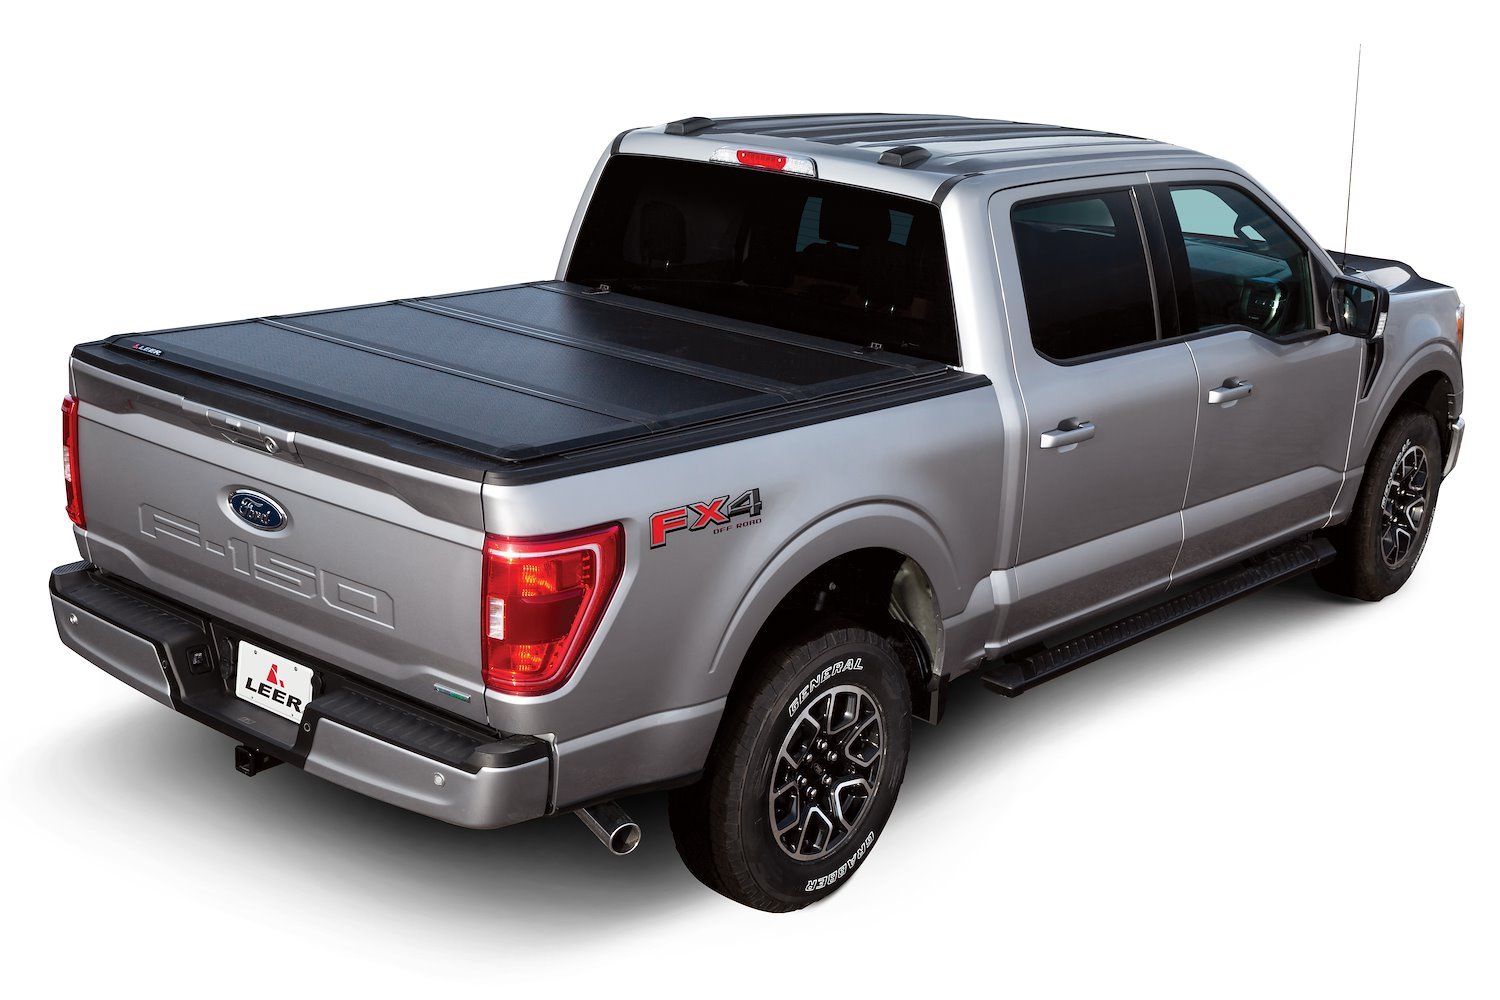 HF350M Hard Tri-Folding Tonneau Cover Fits Select Chevrolet Colorado, GMC Canyon [Bed Length: 5 ft. 2 in.]